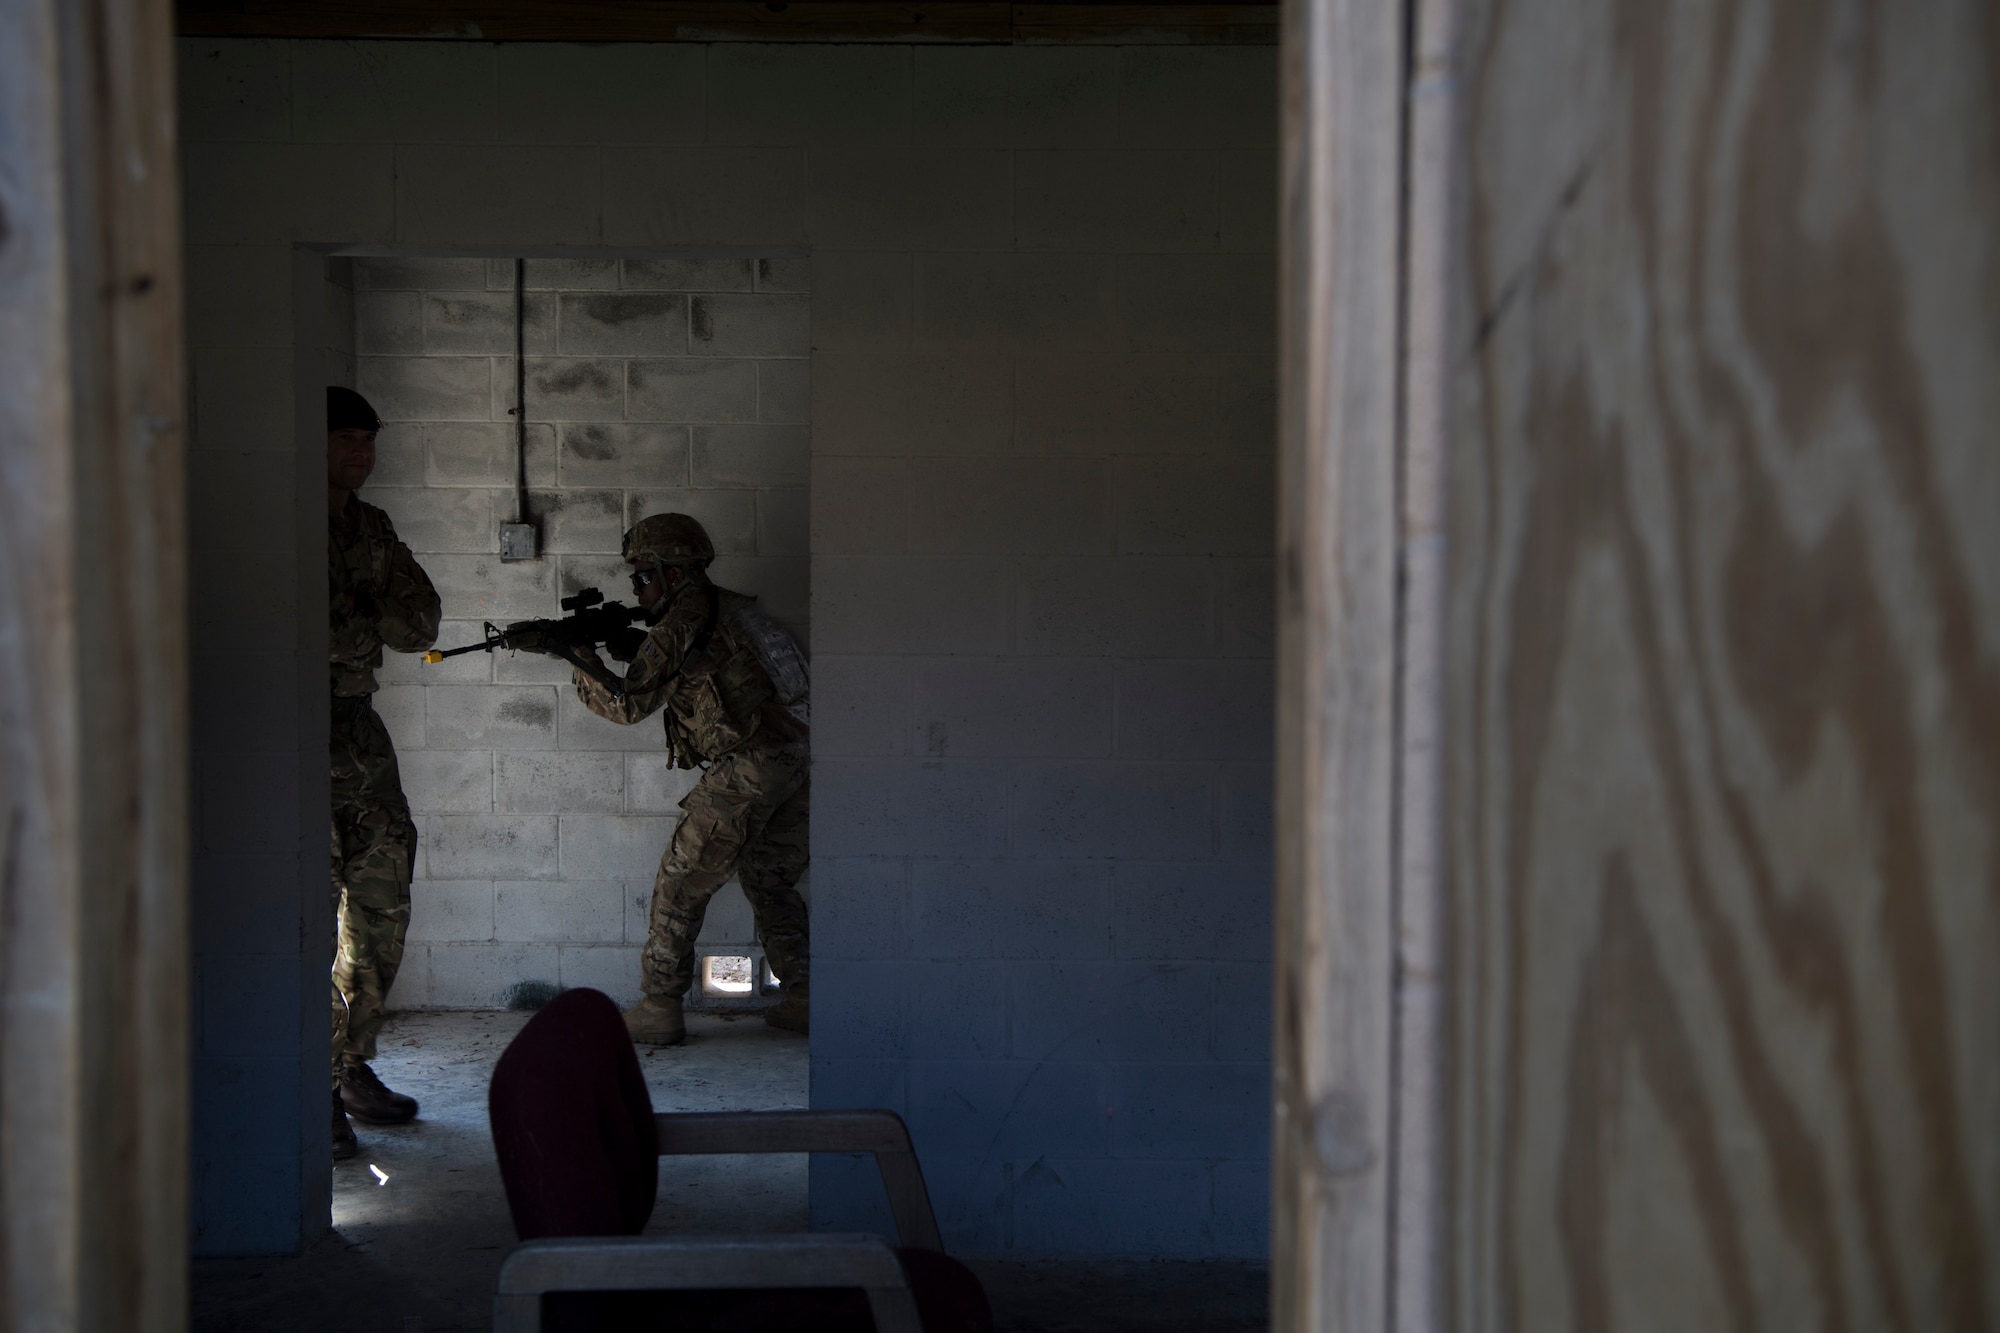 An Airman from the 824th Base Defense Squadron guards the entrance to a building while British Royal Air Force Sgt. Glenn Risebrow, left, 15th Squadron senior noncommissioned officer in charge of training, observes during close-quarters battle training, Feb. 28, 2018, at Moody Air Force Base, Ga. The 820th Base Defense Group welcomed a member of the British Royal Air Force to embed into multiple training situations to help strengthen combined operations between U.S. and British forces. (U.S. Air Force photo by Senior Airman Daniel Snider)